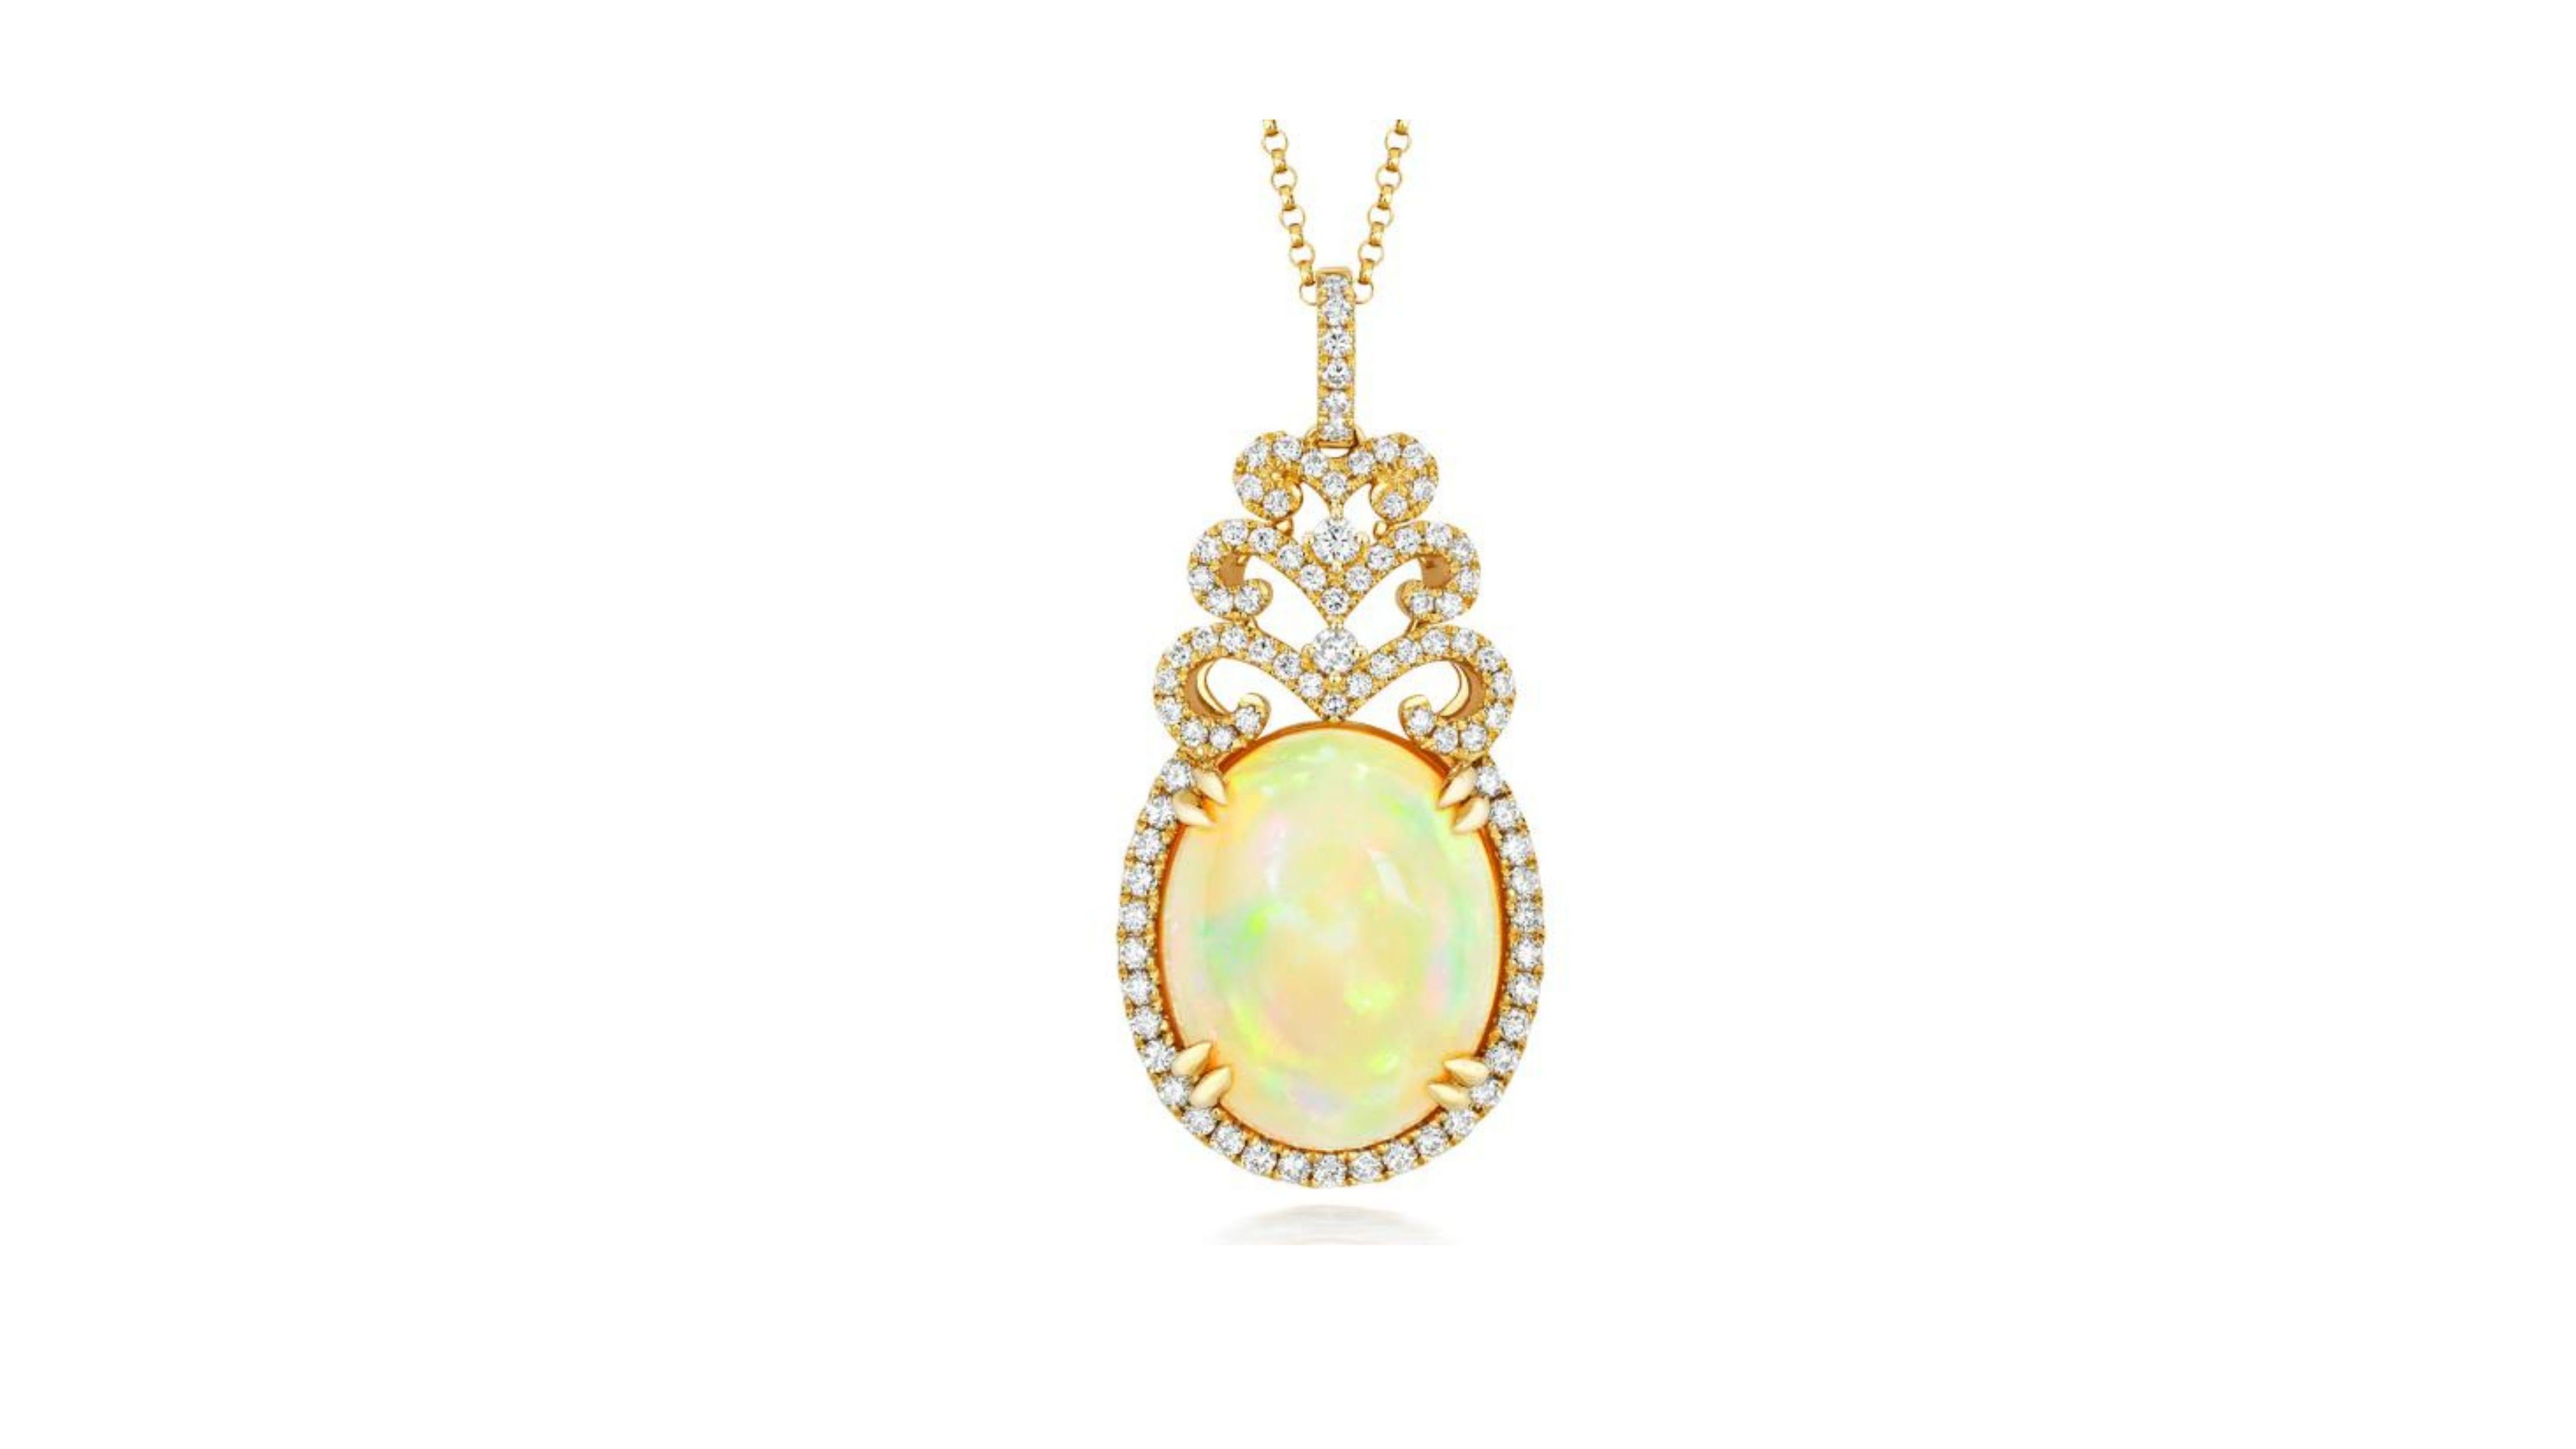 Oval Cut Ethiopian Opal Diamond Necklace 18K Yellow Gold For Sale